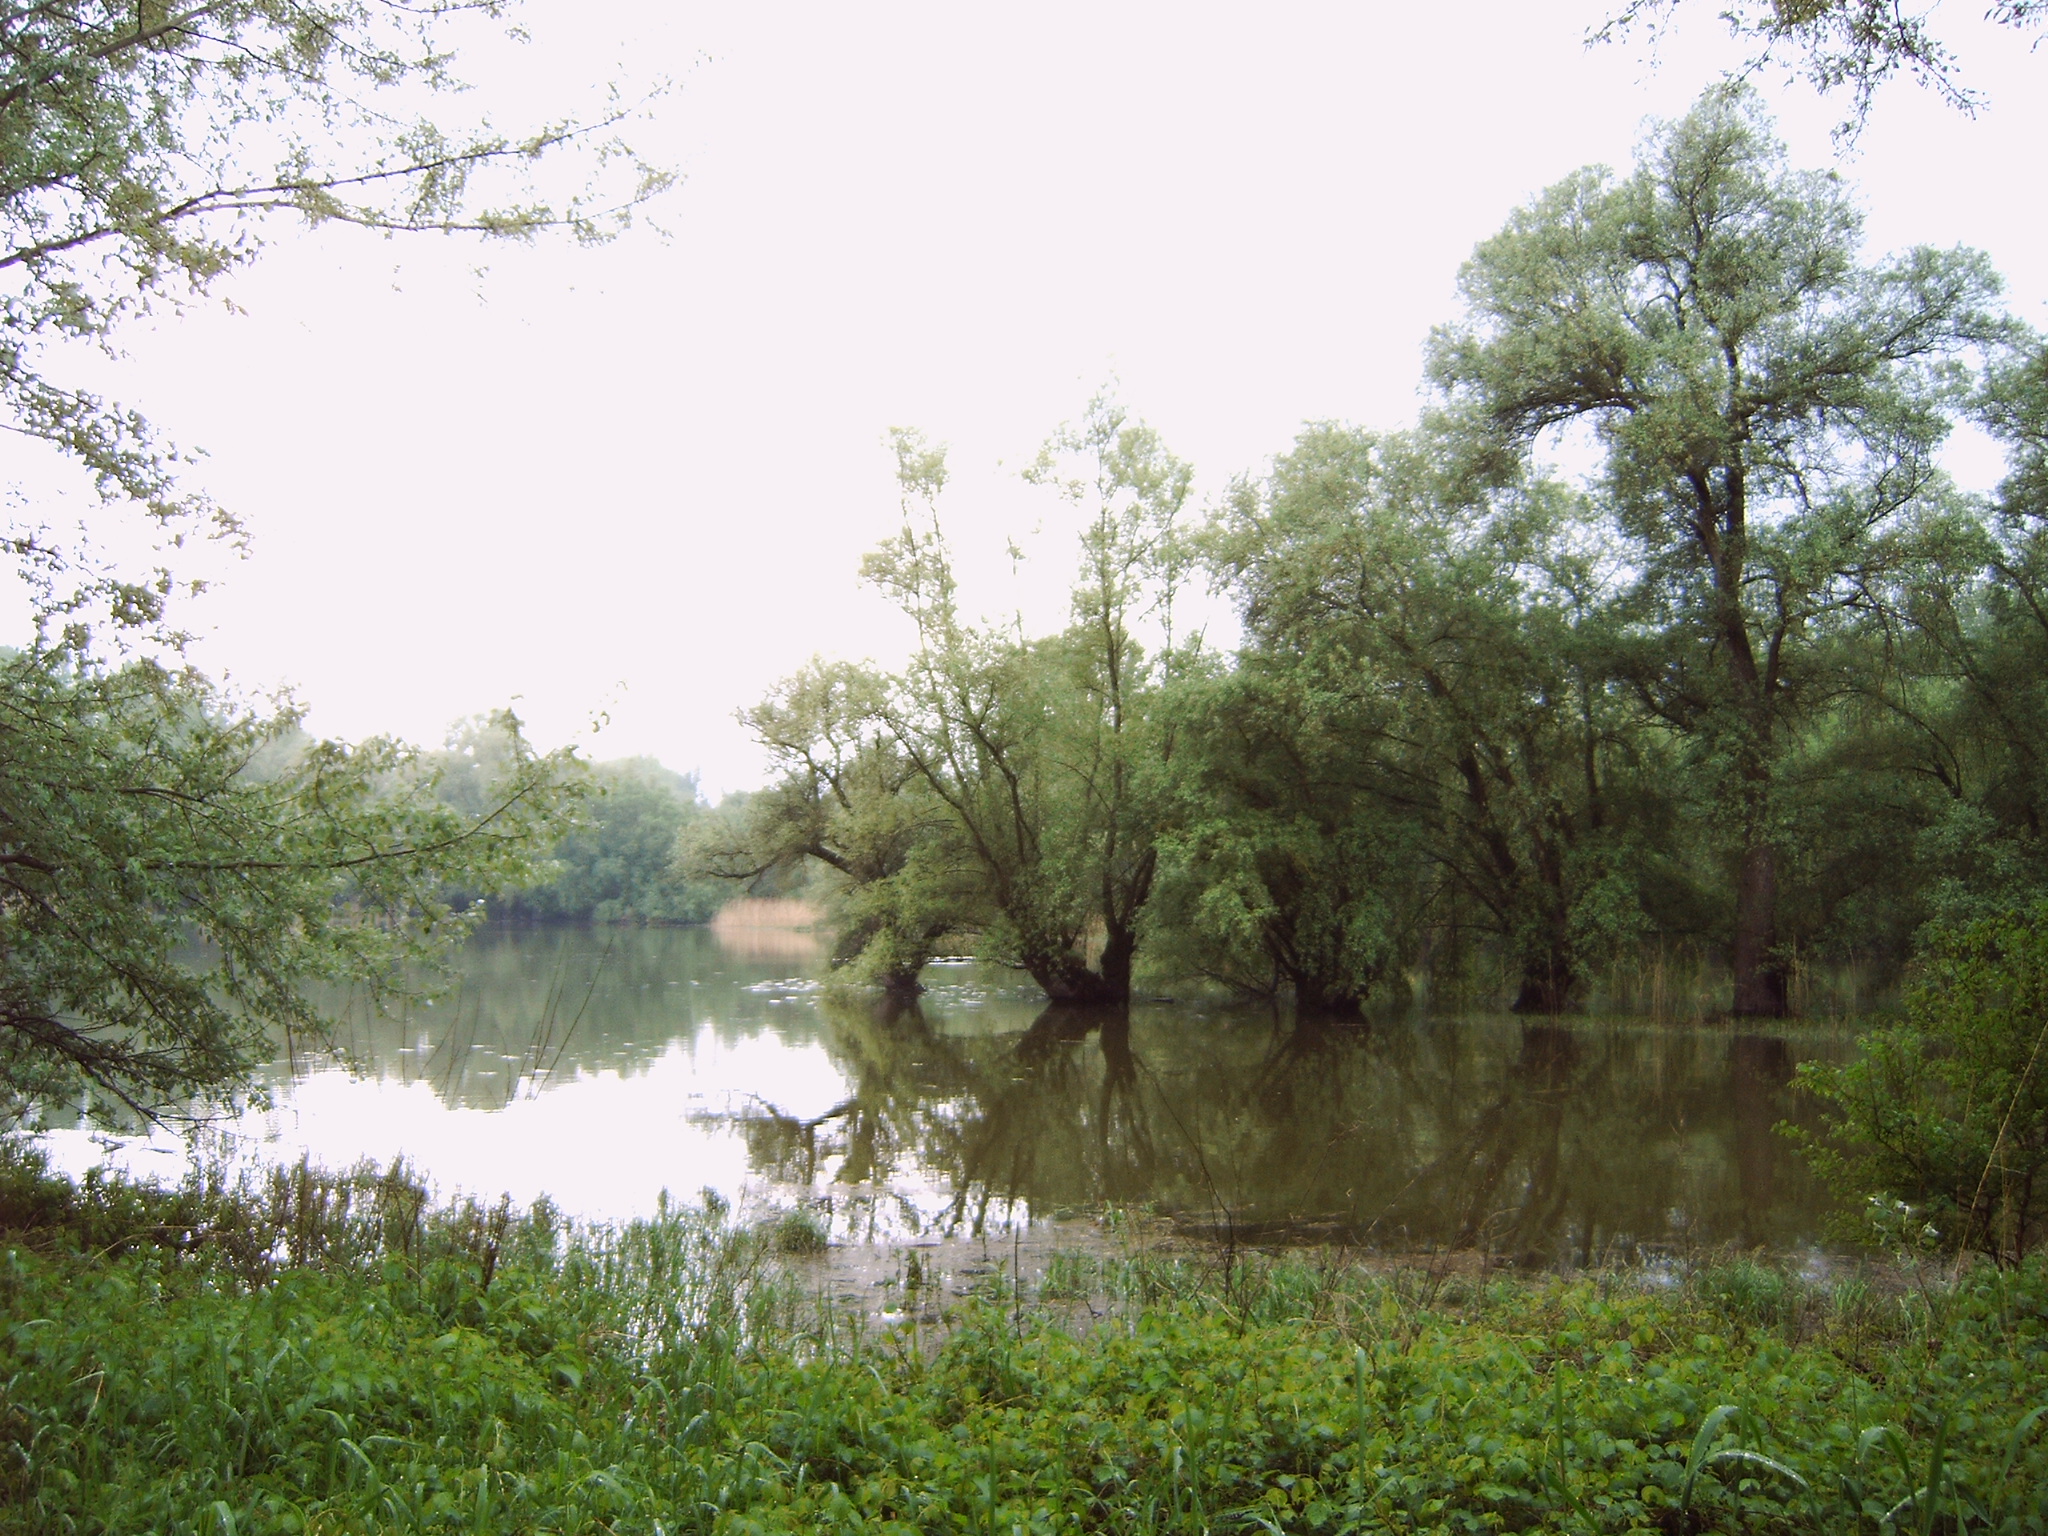 a flooded landscape with trees and plants